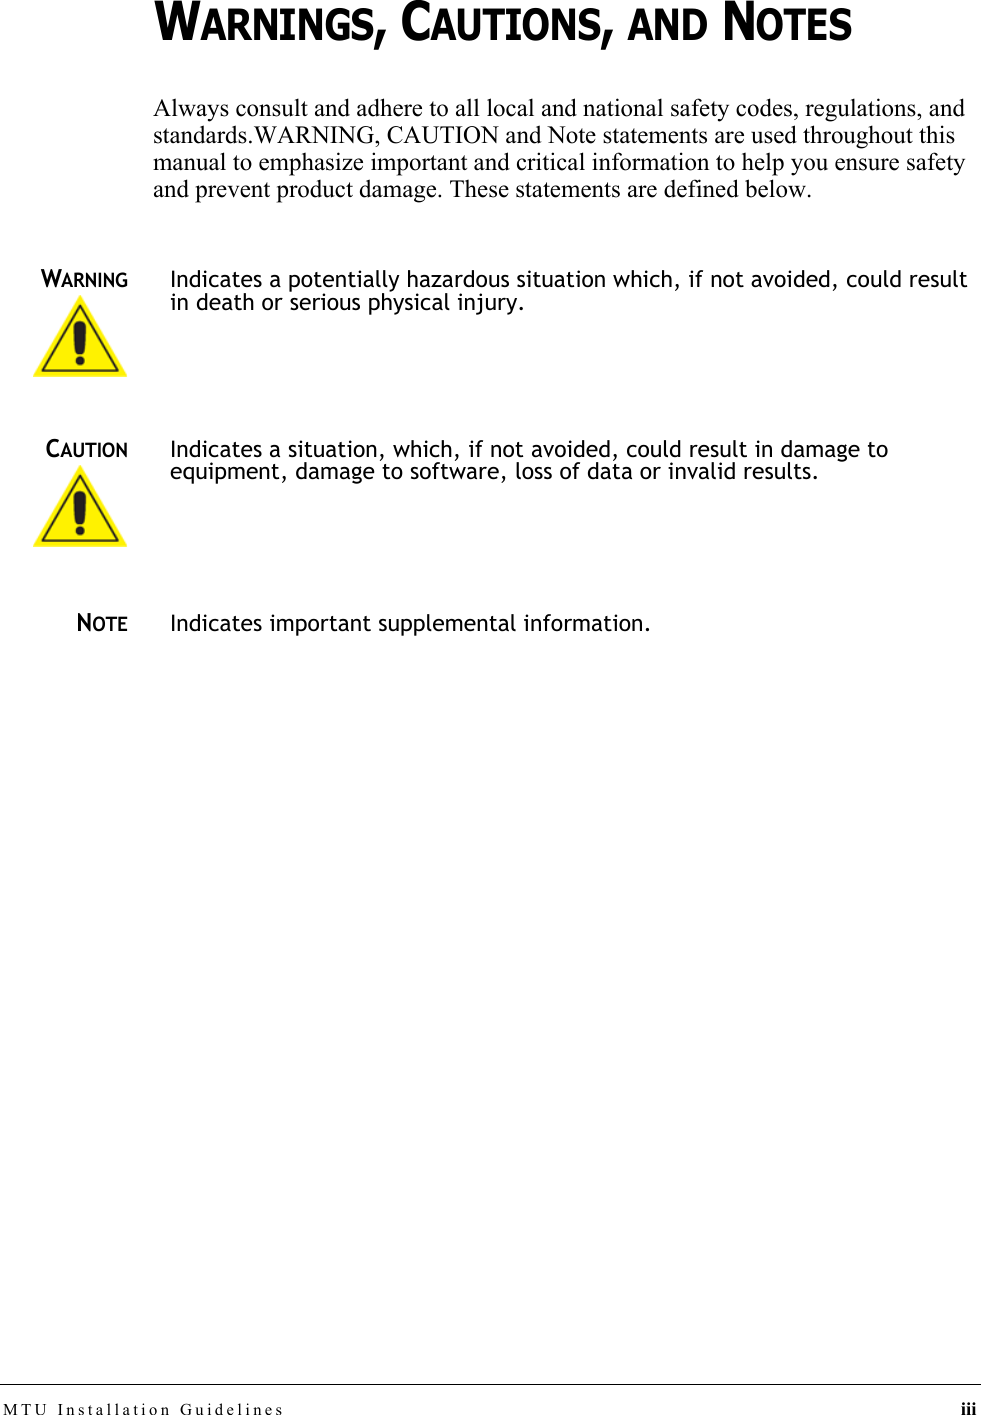 MTU Installation Guidelines iiiWARNINGS, CAUTIONS, AND NOTESAlways consult and adhere to all local and national safety codes, regulations, and standards.WARNING, CAUTION and Note statements are used throughout this manual to emphasize important and critical information to help you ensure safety and prevent product damage. These statements are defined below.WARNINGIndicates a potentially hazardous situation which, if not avoided, could result in death or serious physical injury.CAUTIONIndicates a situation, which, if not avoided, could result in damage to equipment, damage to software, loss of data or invalid results.NOTEIndicates important supplemental information.DRAFT